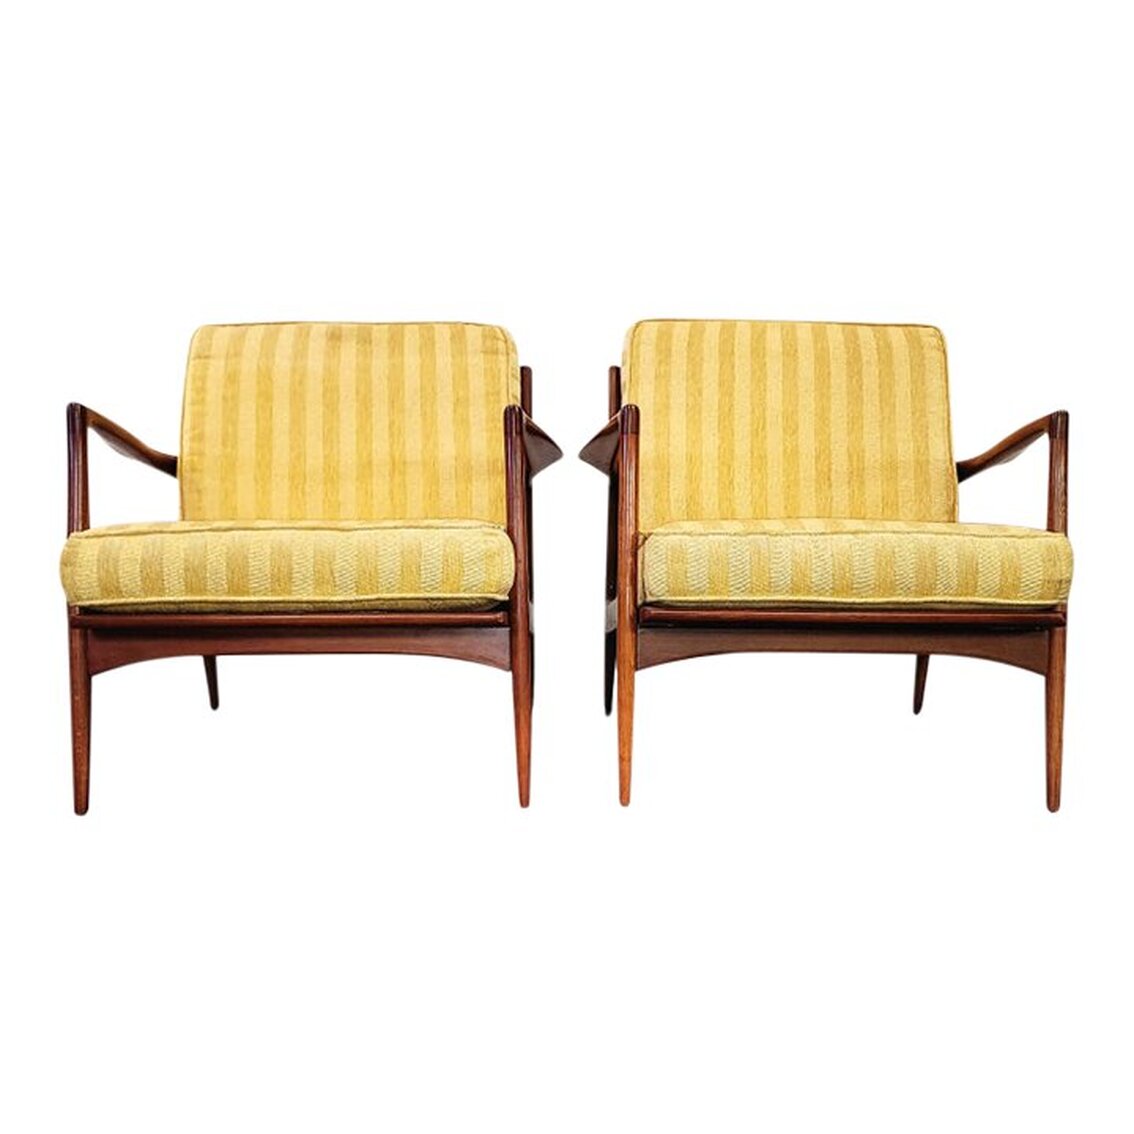 Pair Mid-Century Modern Lounge Chairs | Designed by Ib Kofod-Larsen for Selig | Made in Denmark | 1958  The chair frames are created in Denmark from Danish beech wood with a walnut finish applied using a 